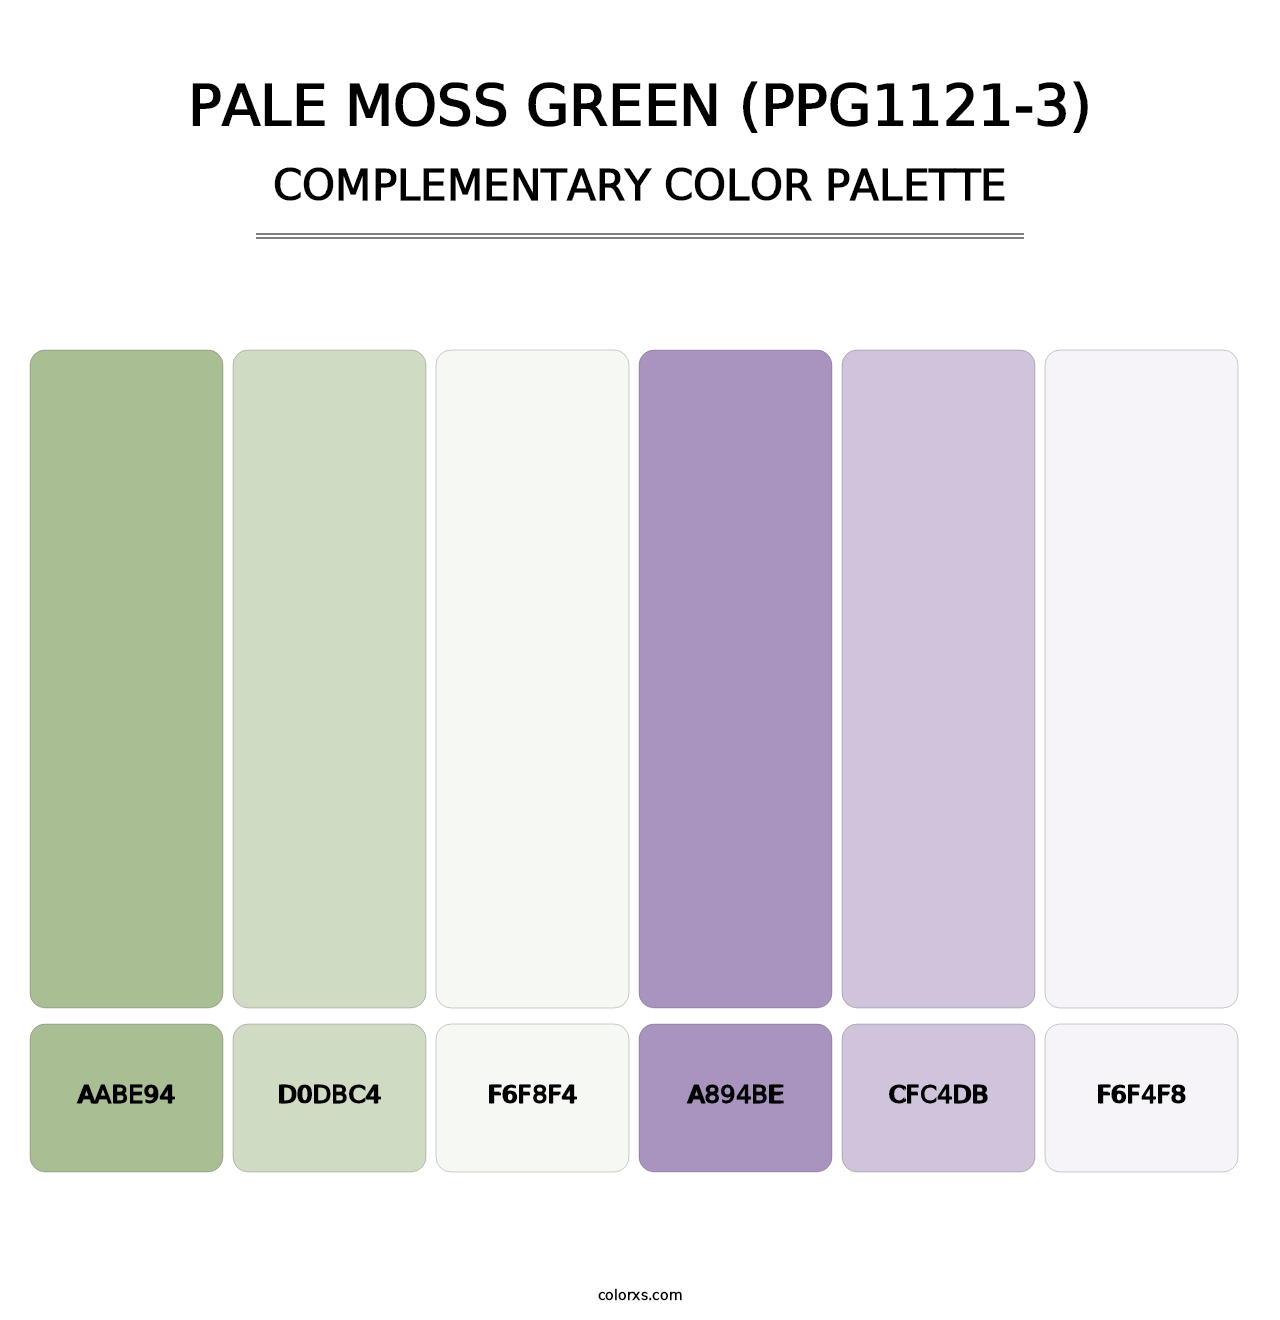 Pale Moss Green (PPG1121-3) - Complementary Color Palette